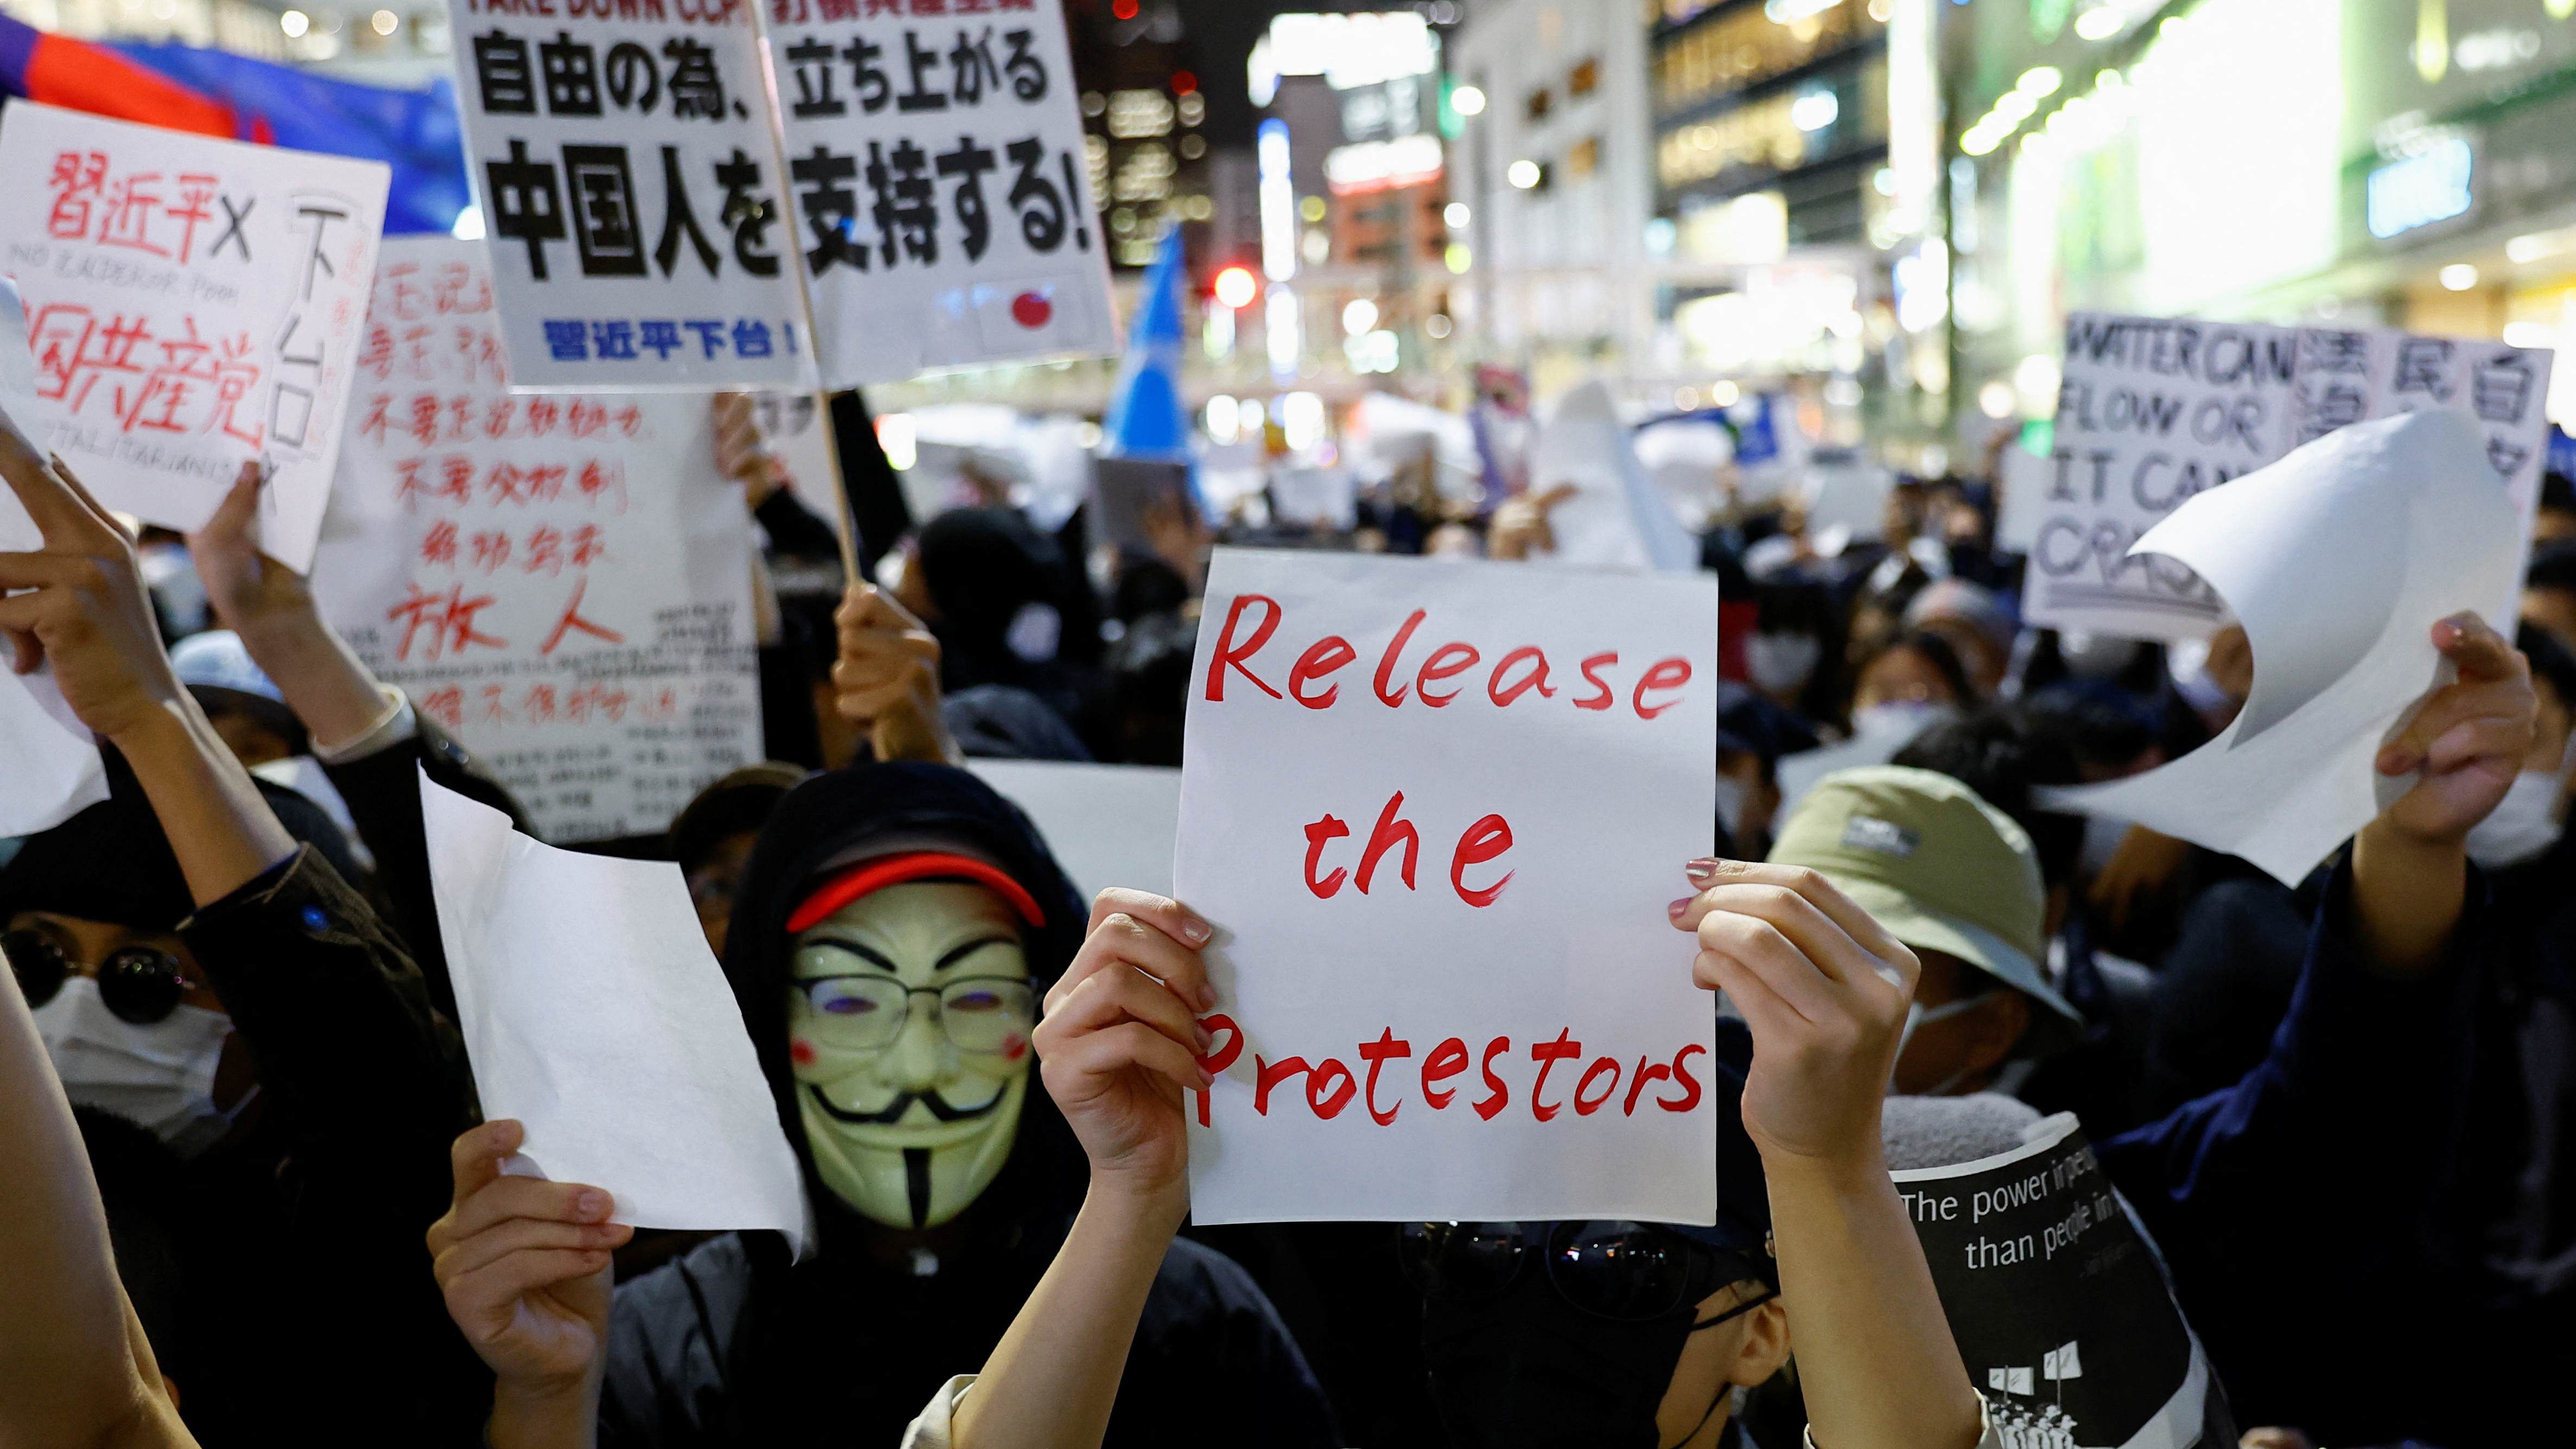 Chinese residents living in Japan take part in a solidarity protest against China's Covid-19 lockdowns, in Tokyo, Japan. Credit: Reuters Photo